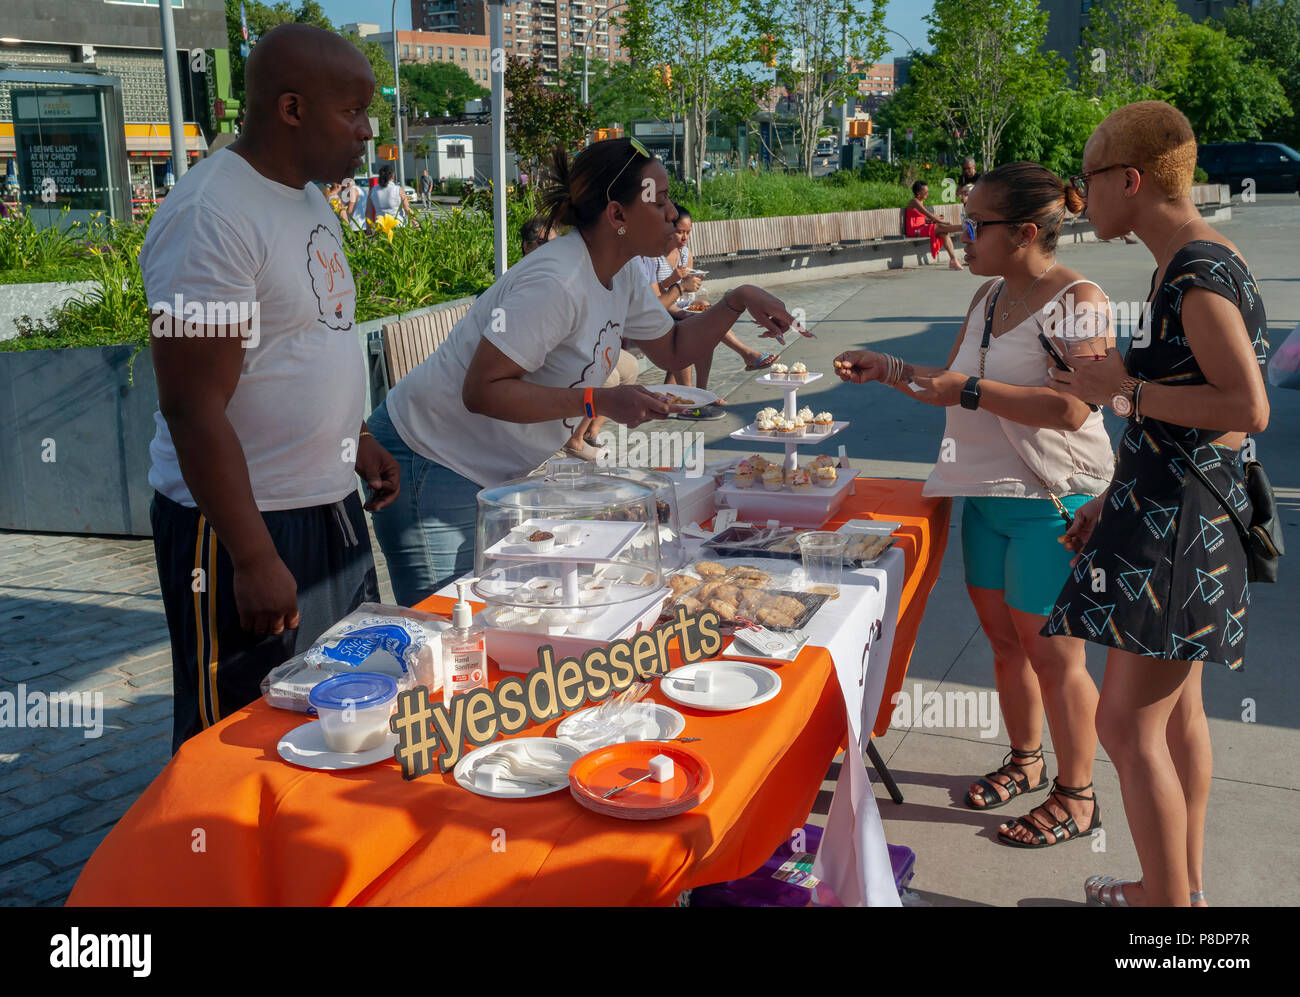 “Yes Desserts” booth during the opening evening of the Bronx Night Market in Fordham Plaza in the Bronx in New York on Saturday, June 30, 2018. The first-ever foodie market in the Bronx features vendors from the borough serving dishes featuring the polyglot of ethnicities tha make up the borough. The market will take place on the last Saturday of the month until October. (© Richard B. Levine) Stock Photo